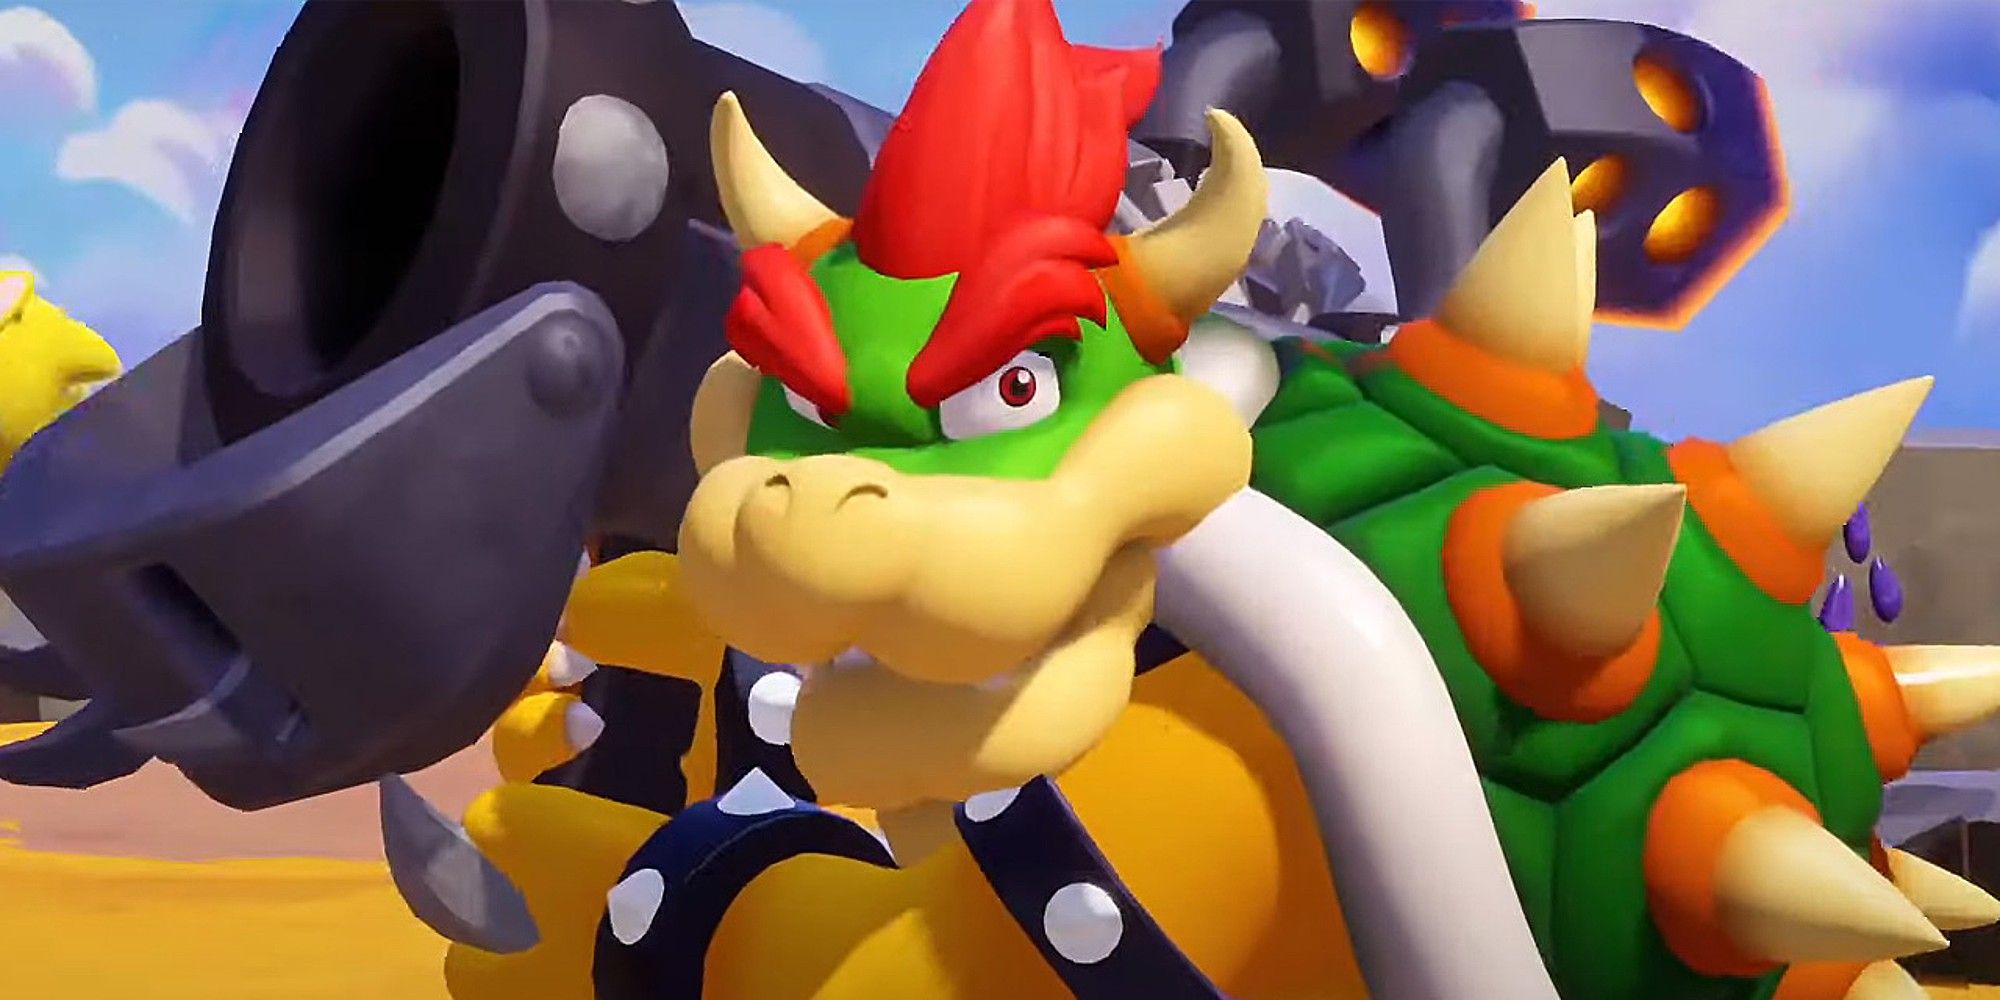 Bowser holding is Bowzooka weapon in Mario + Rabbids Sparks Of Hope